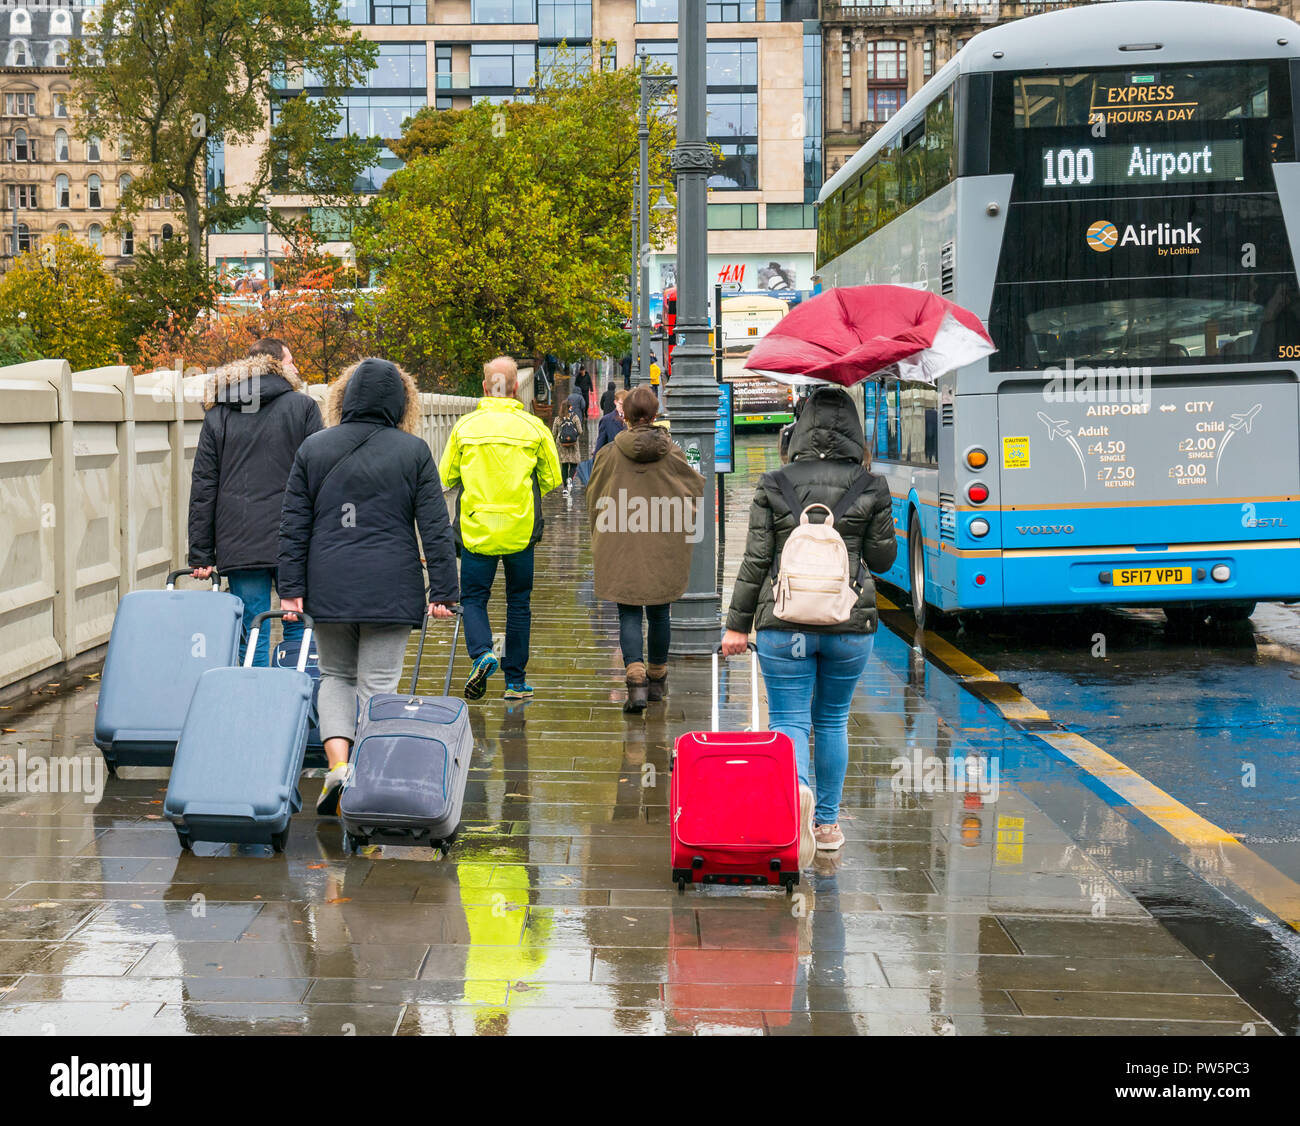 Waverley Bridge, Edinburgh, Scotland, United Kingdom, 12th October 2018. UK Weather: Rain heralds the arrival of Storm Callum in the capital city, but doesn't deter the tourists. The wind breaks a woman's umbrella. Tourists walk in the rain with wheeled suitcases to the airport 100 bus service Stock Photo